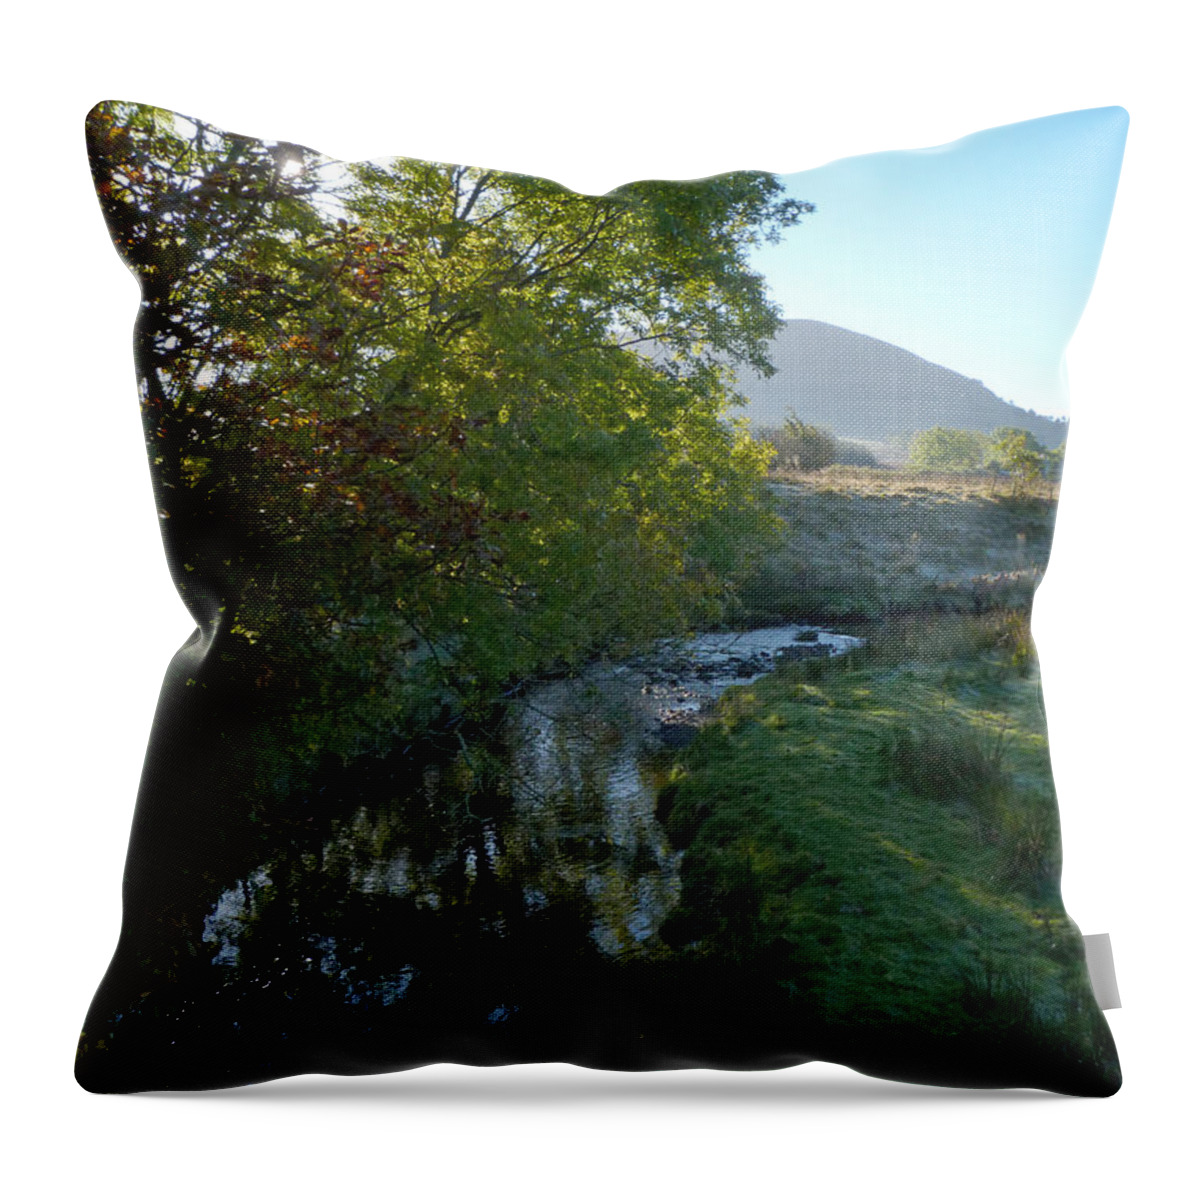 Troutbeck Throw Pillow featuring the photograph Troutbeck - Autumn Morning by Phil Banks